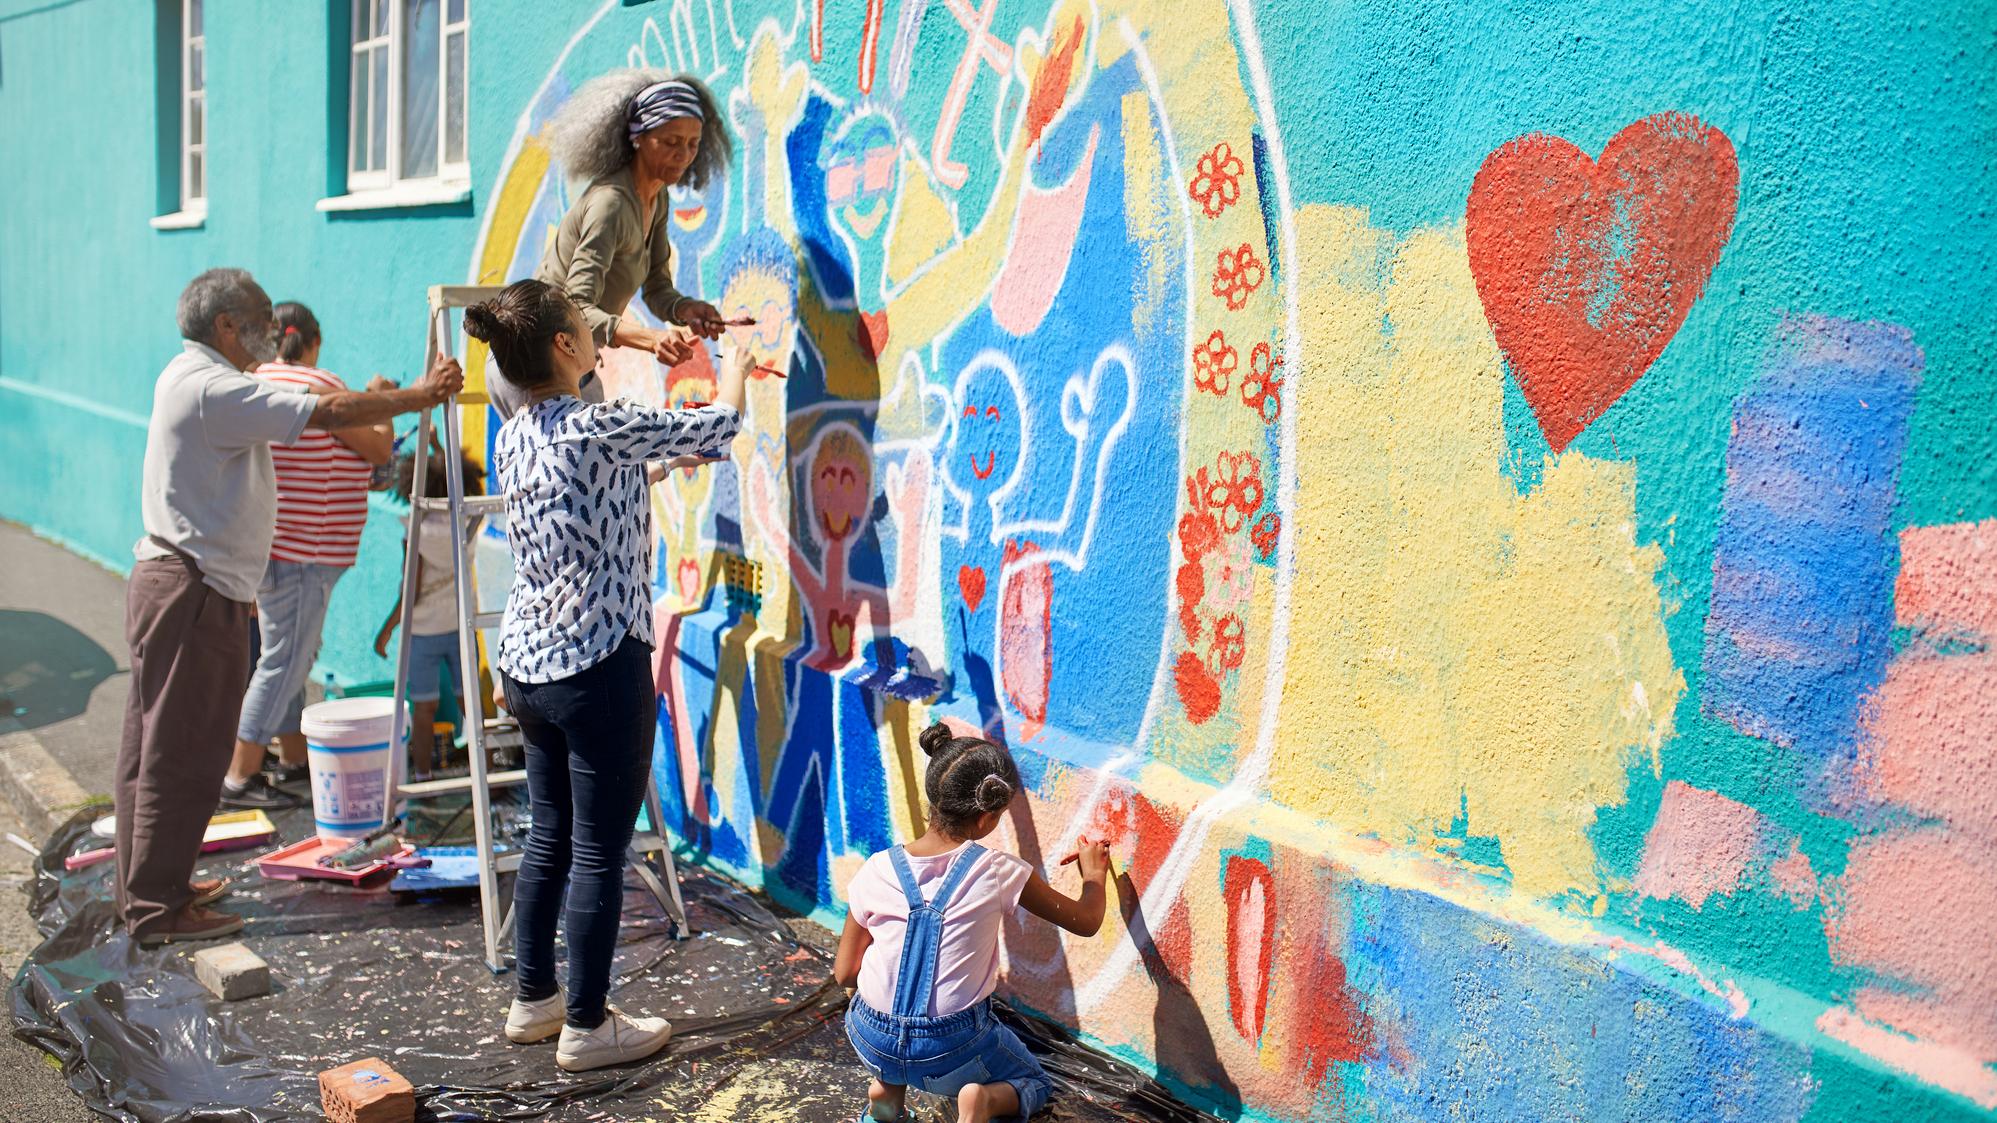 Group of people painting an exterior wall with a colorful mural 